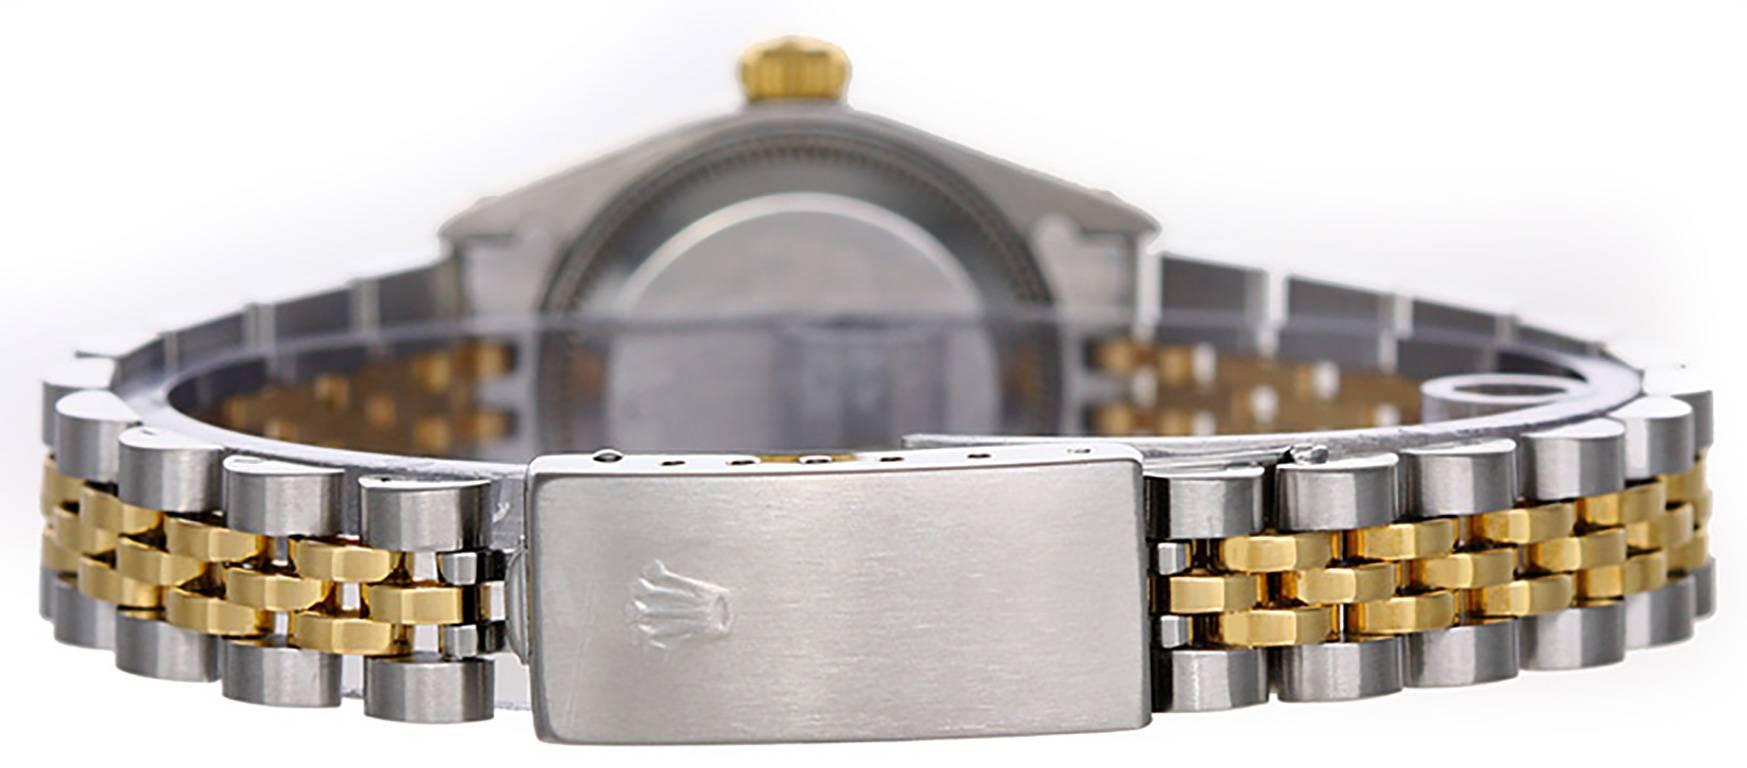 Automatic winding, 29 jewels, Quickset date, sapphire crystal. Stainless steel case and fluted bezel  (26mm diameter). White dial with gold Roman numerals. Stainless steel and 18k yellow gold Jubilee bracelet. Pre-owned with box. Current Replacement